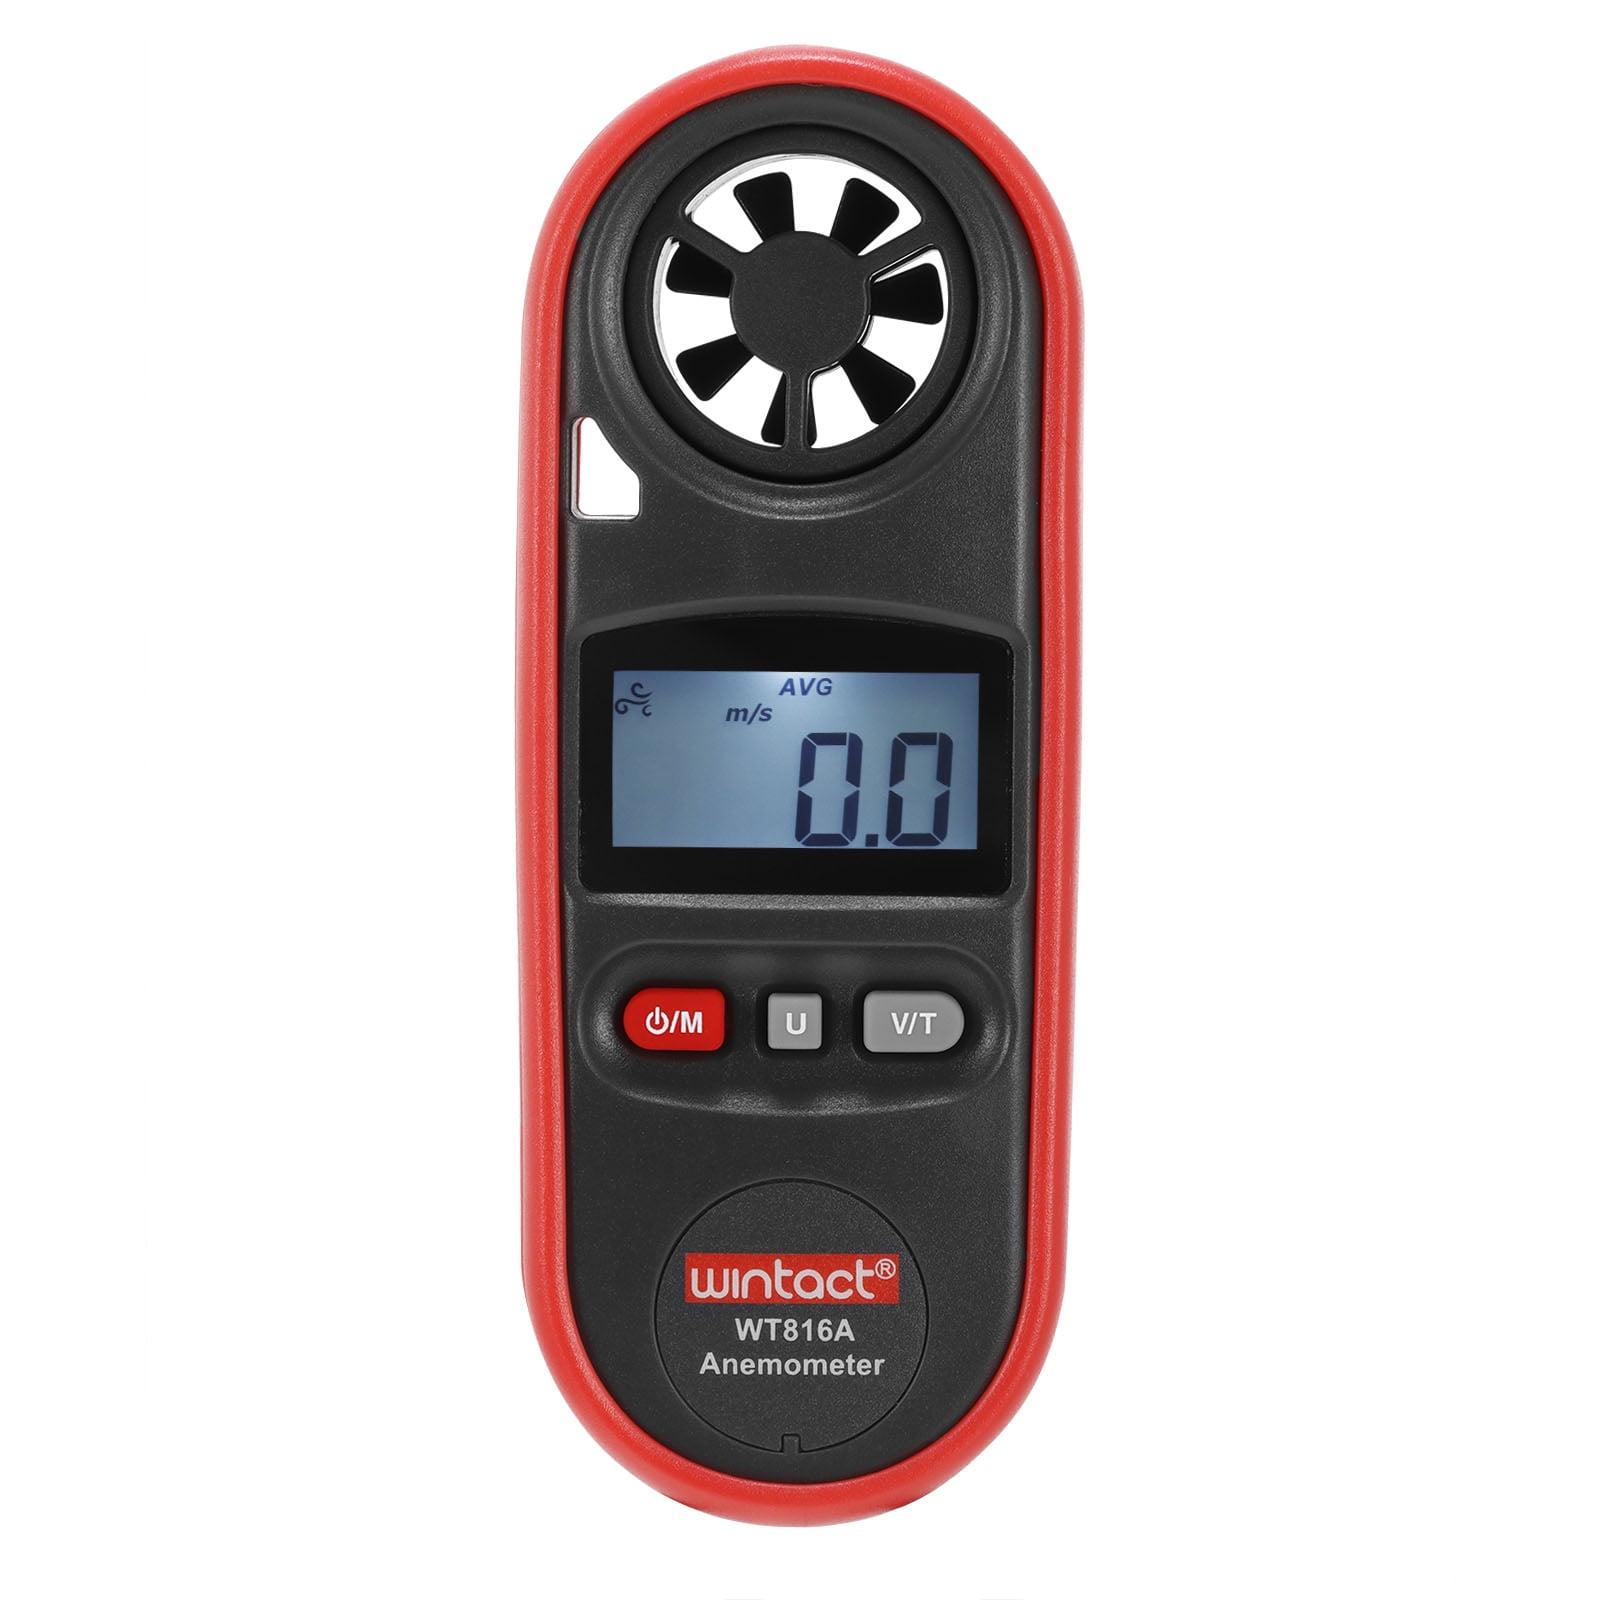 WT816 Digital Anemometer Airflow Thermometer Tester Speed Meter Outdoors Sailing Surfing Use Wind Speed Meter 